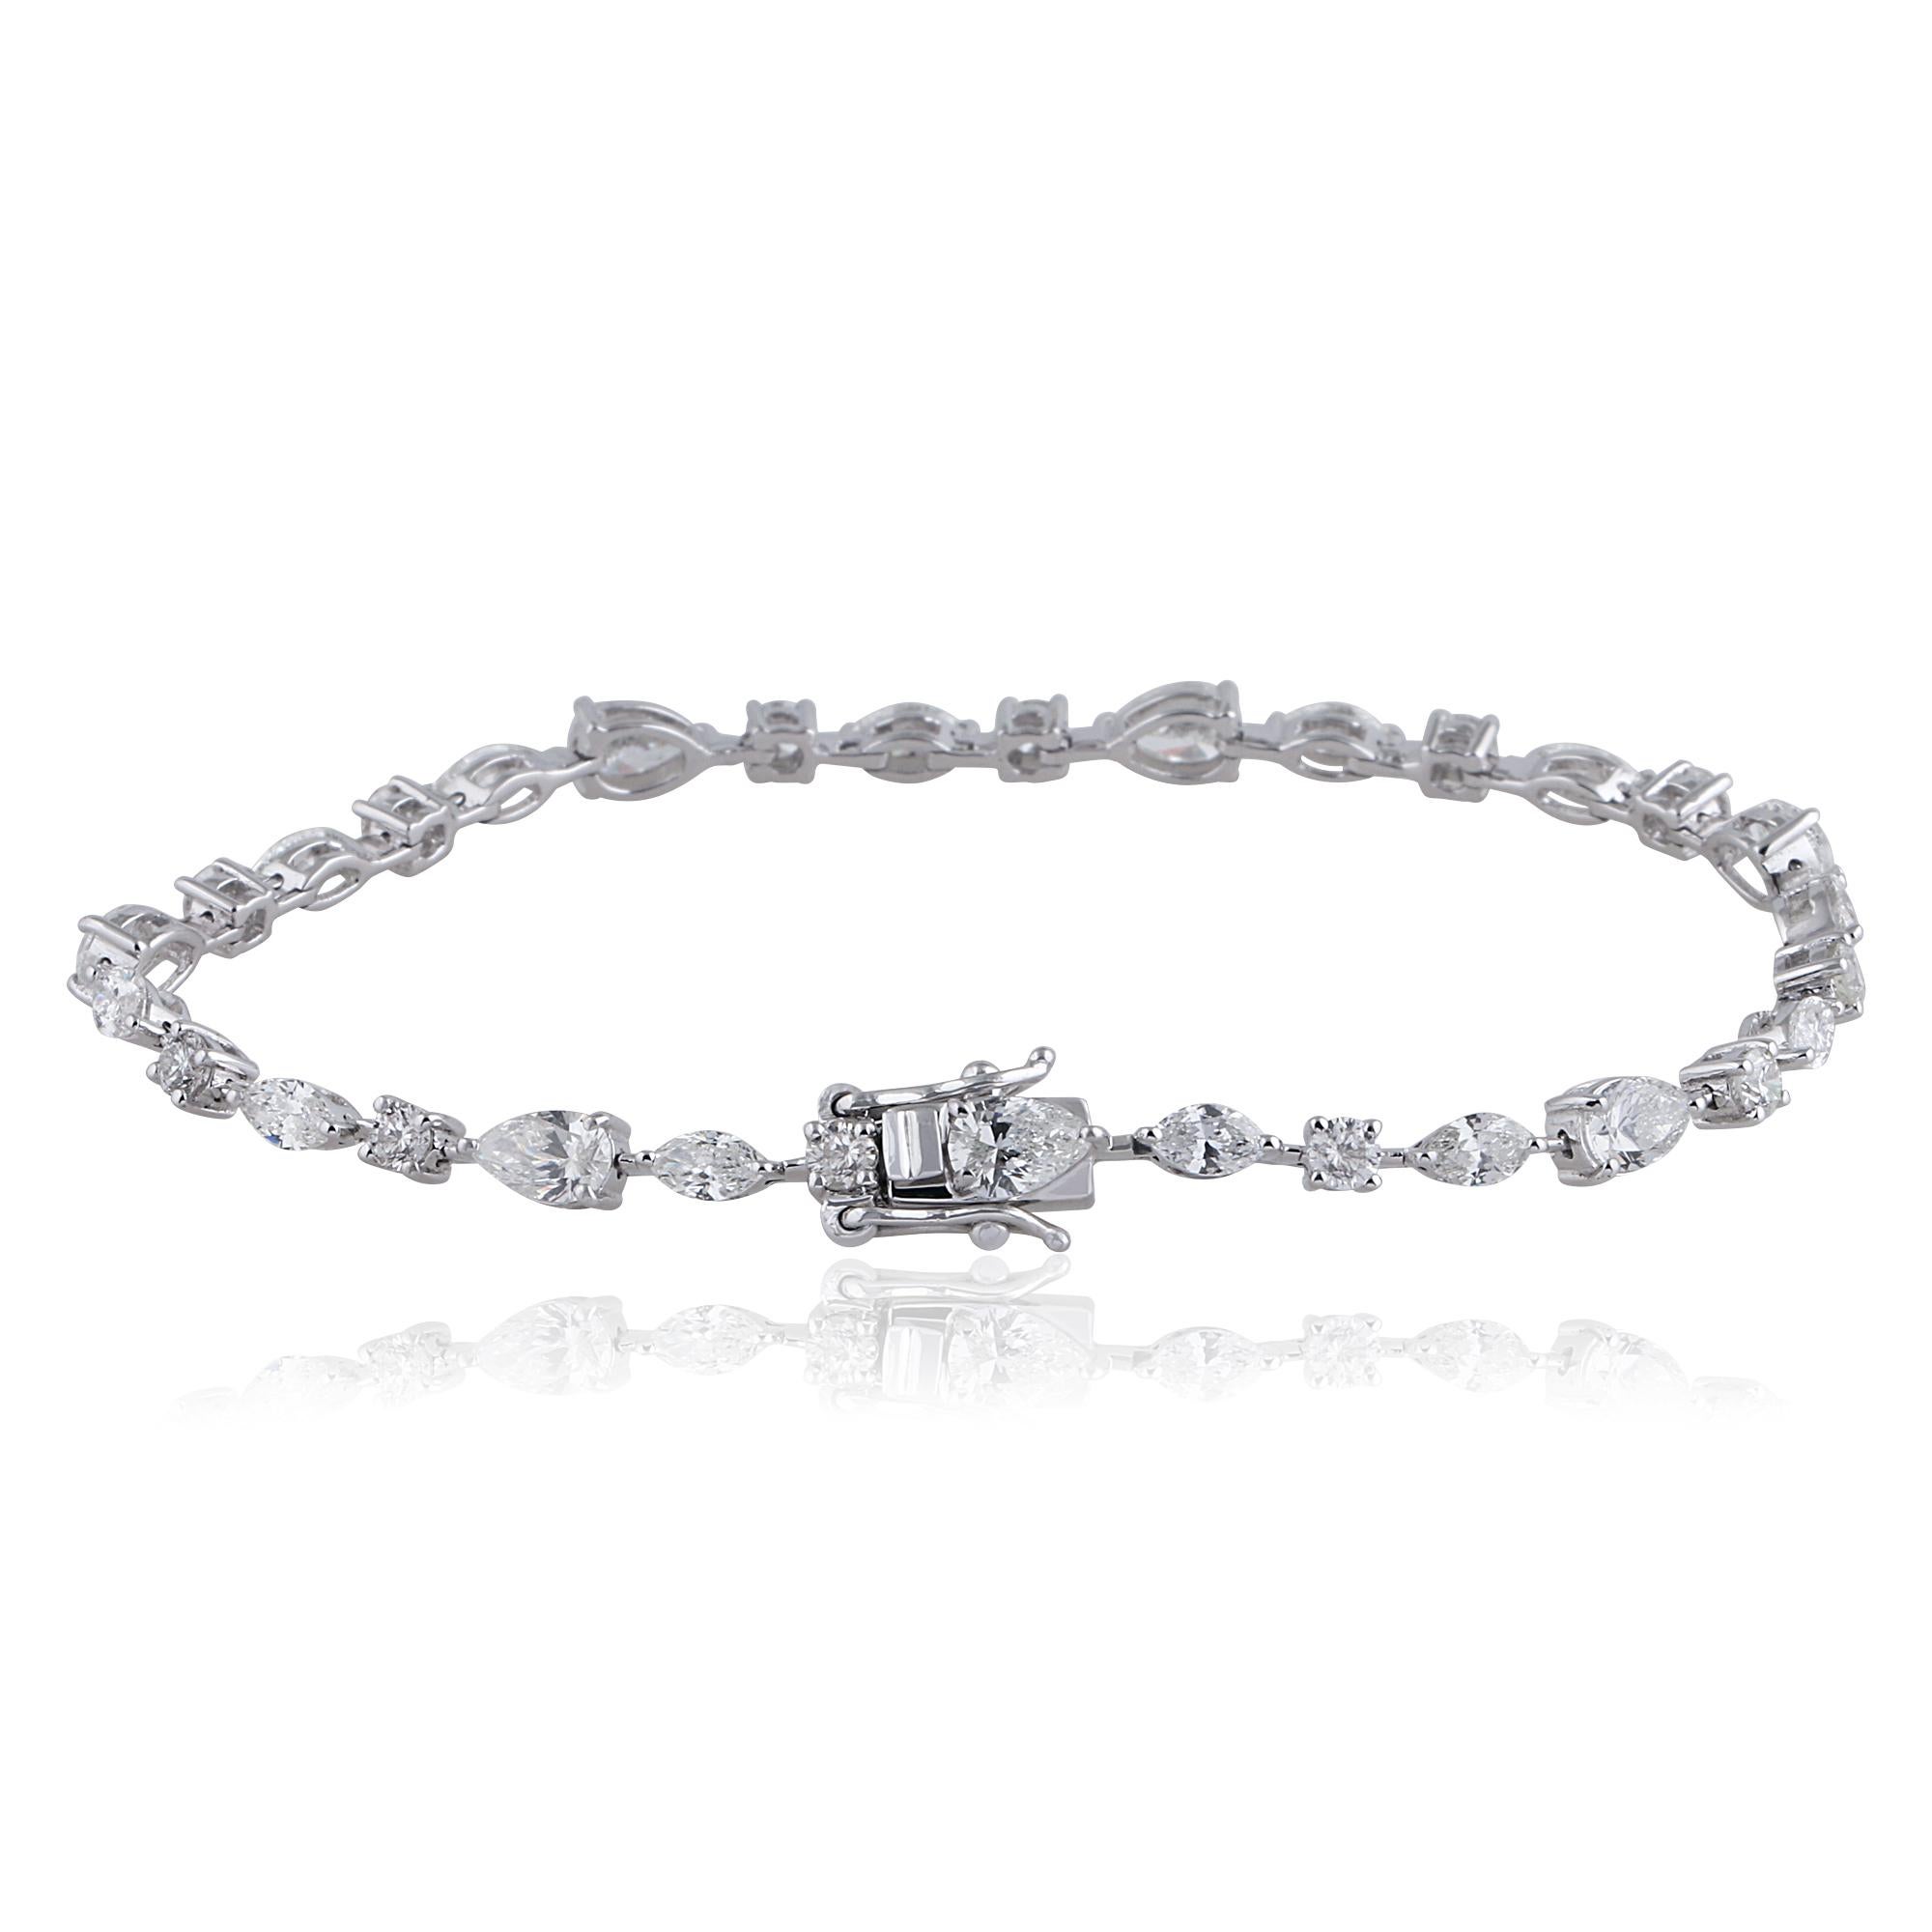 Item Code :- CN-26411
Gross Weight :- 7.39 gm
14k White Gold Weight :- 6.39 gm
Diamond Weight :- 5.00 Carat  ( AVERAGE DIAMOND CLARITY SI1-SI2 & COLOR H-I )
Bracelet Length :- 7 Inches Long
✦ Sizing
.....................
We can adjust most items to